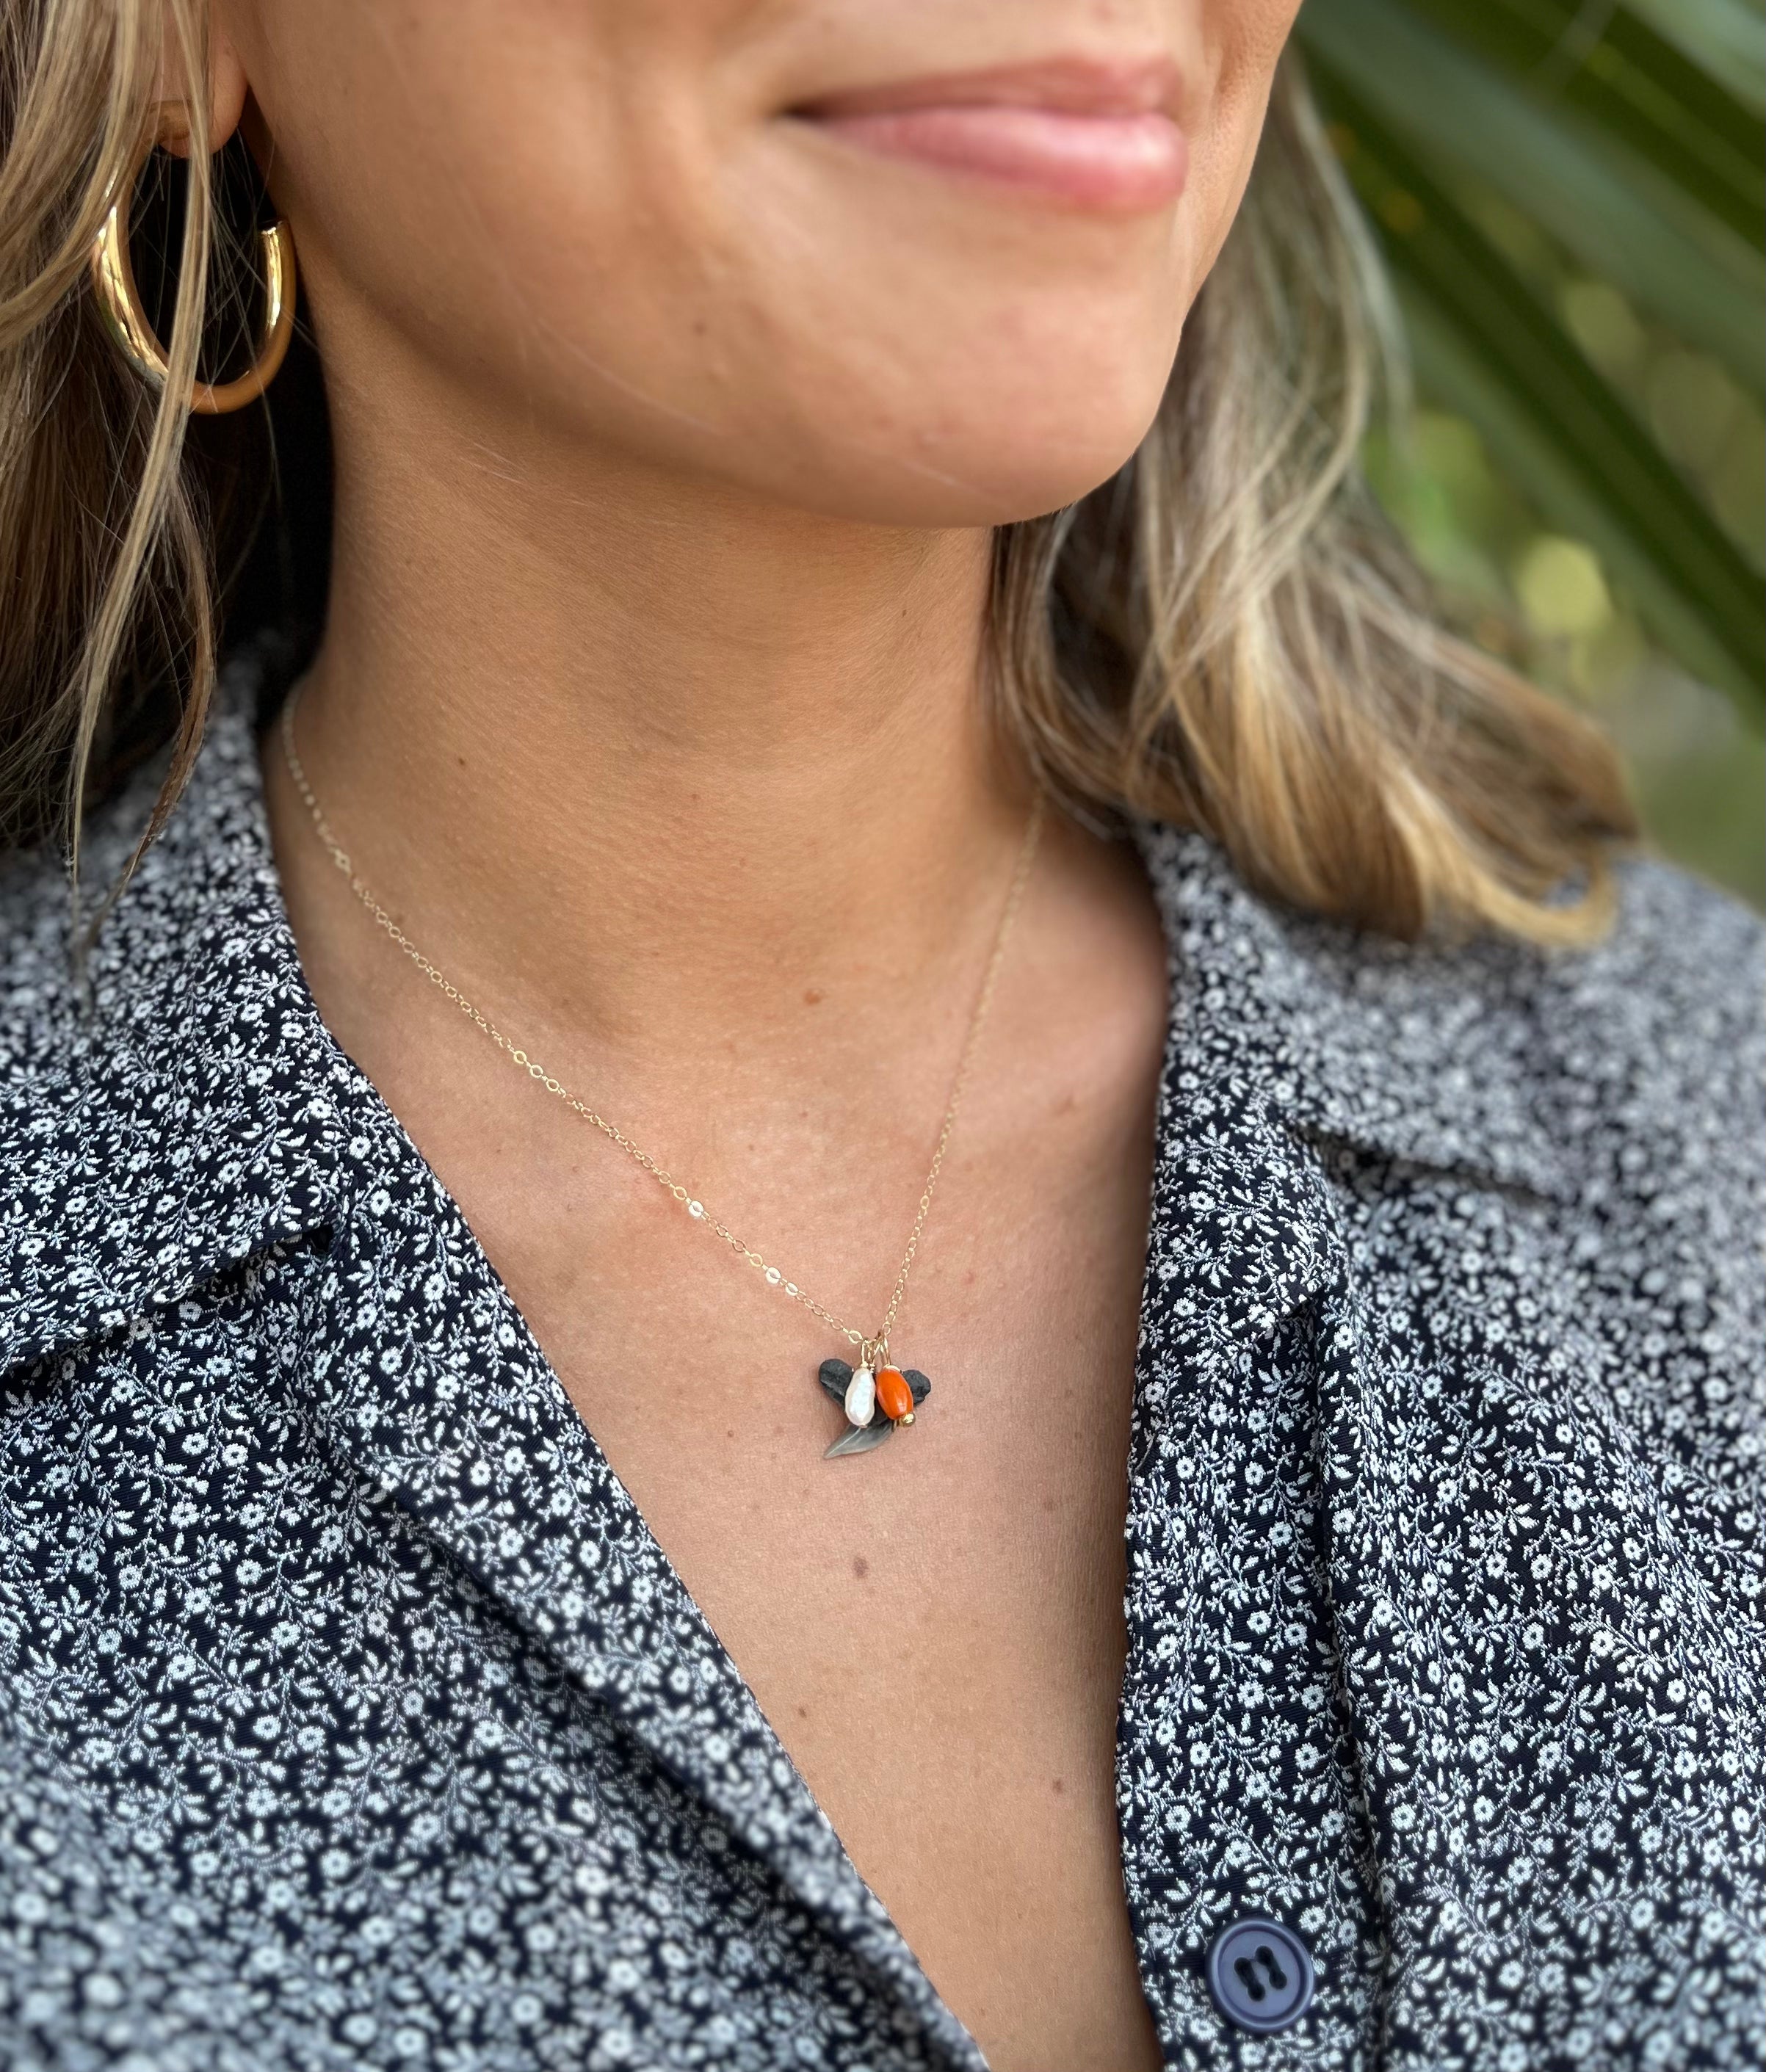 Tiny shark tooth necklace with a pearl and coral on it. Attached to a gold chain. Shown on a woman's neck. 